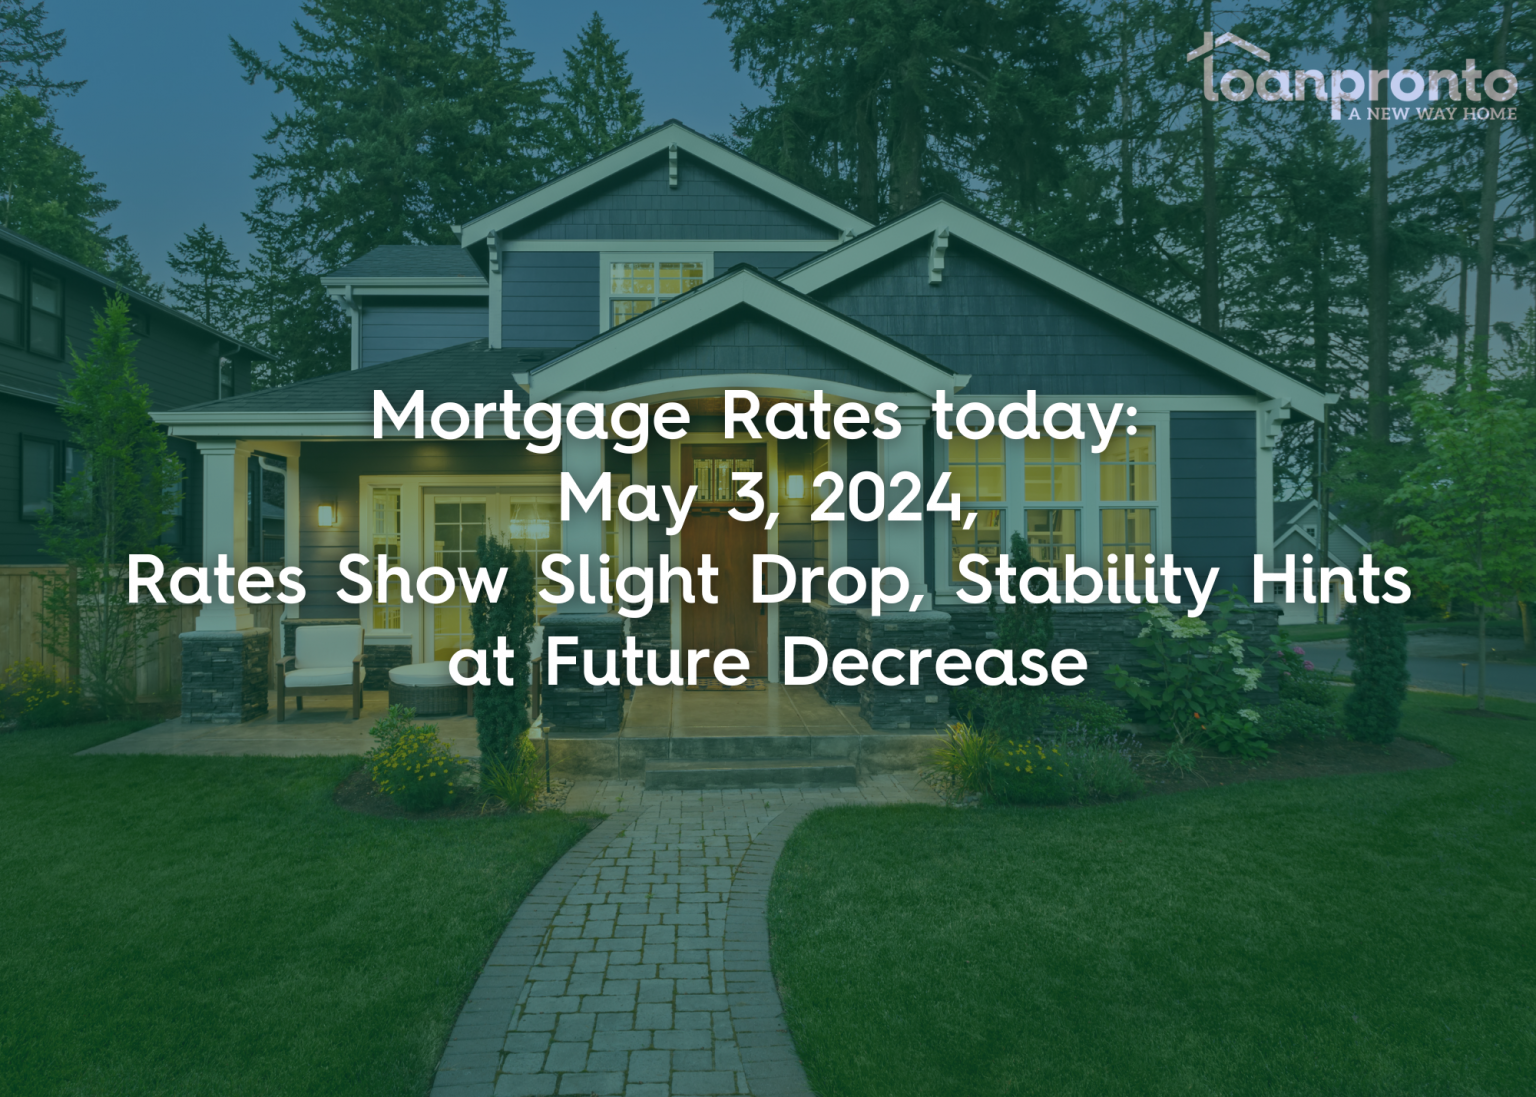 The mortgage market showed positive data movement this week for home purchasing and refinancing